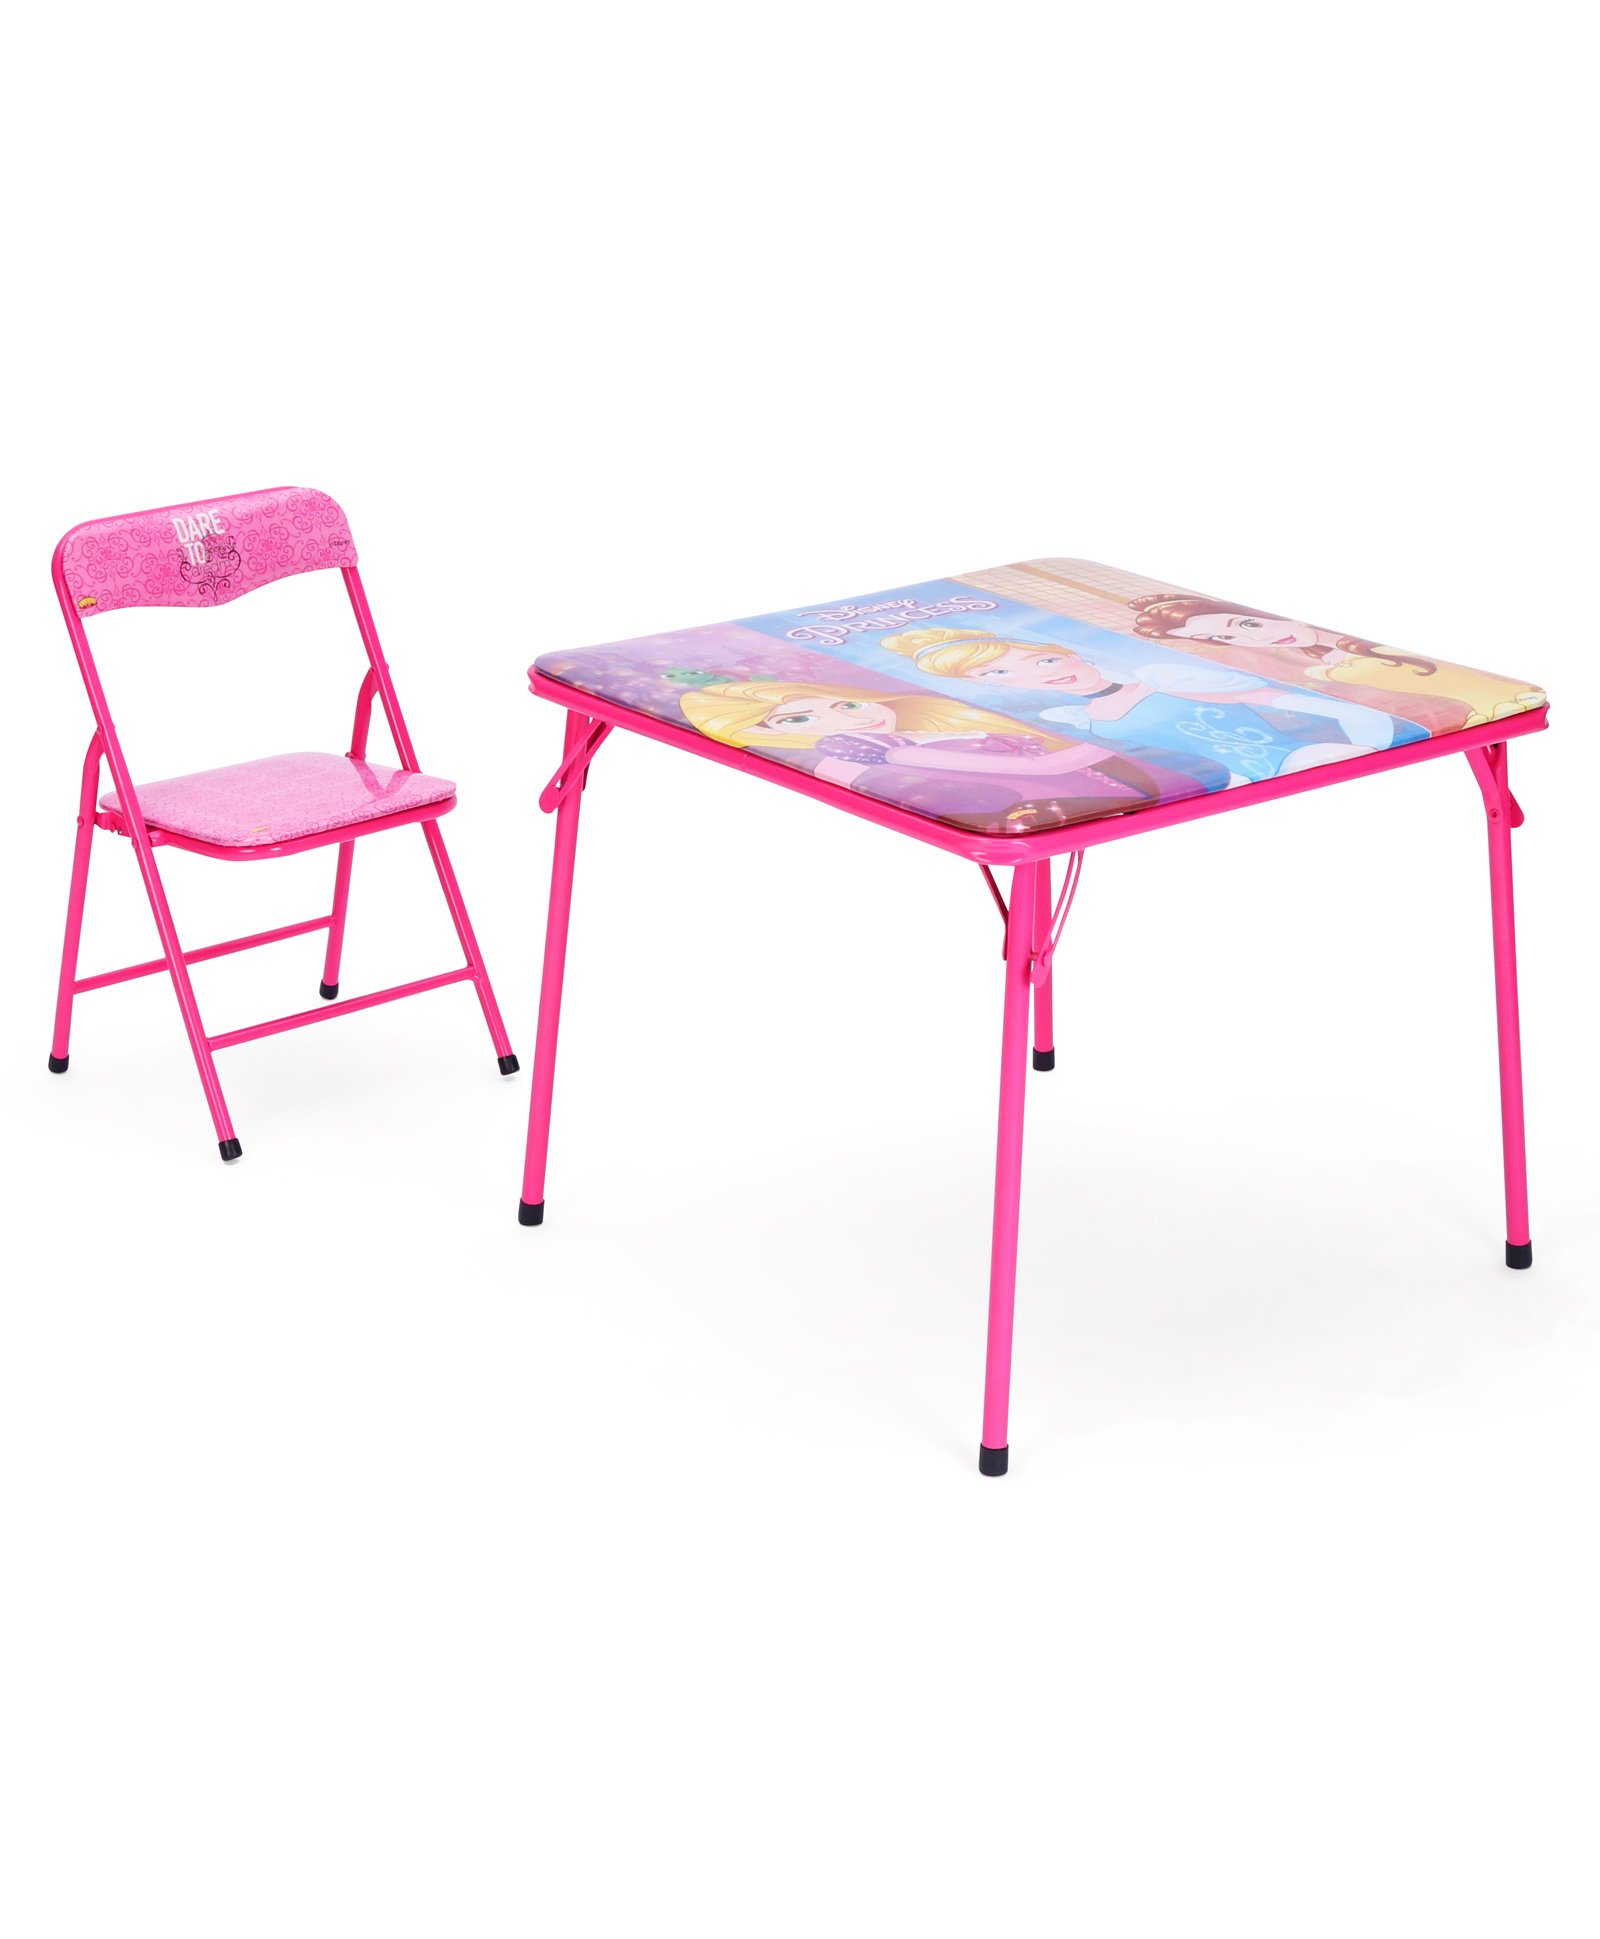 Disney Princess Table And Chair Set Pink Online In India Buy At Best Price From Firstcry Com 3741091